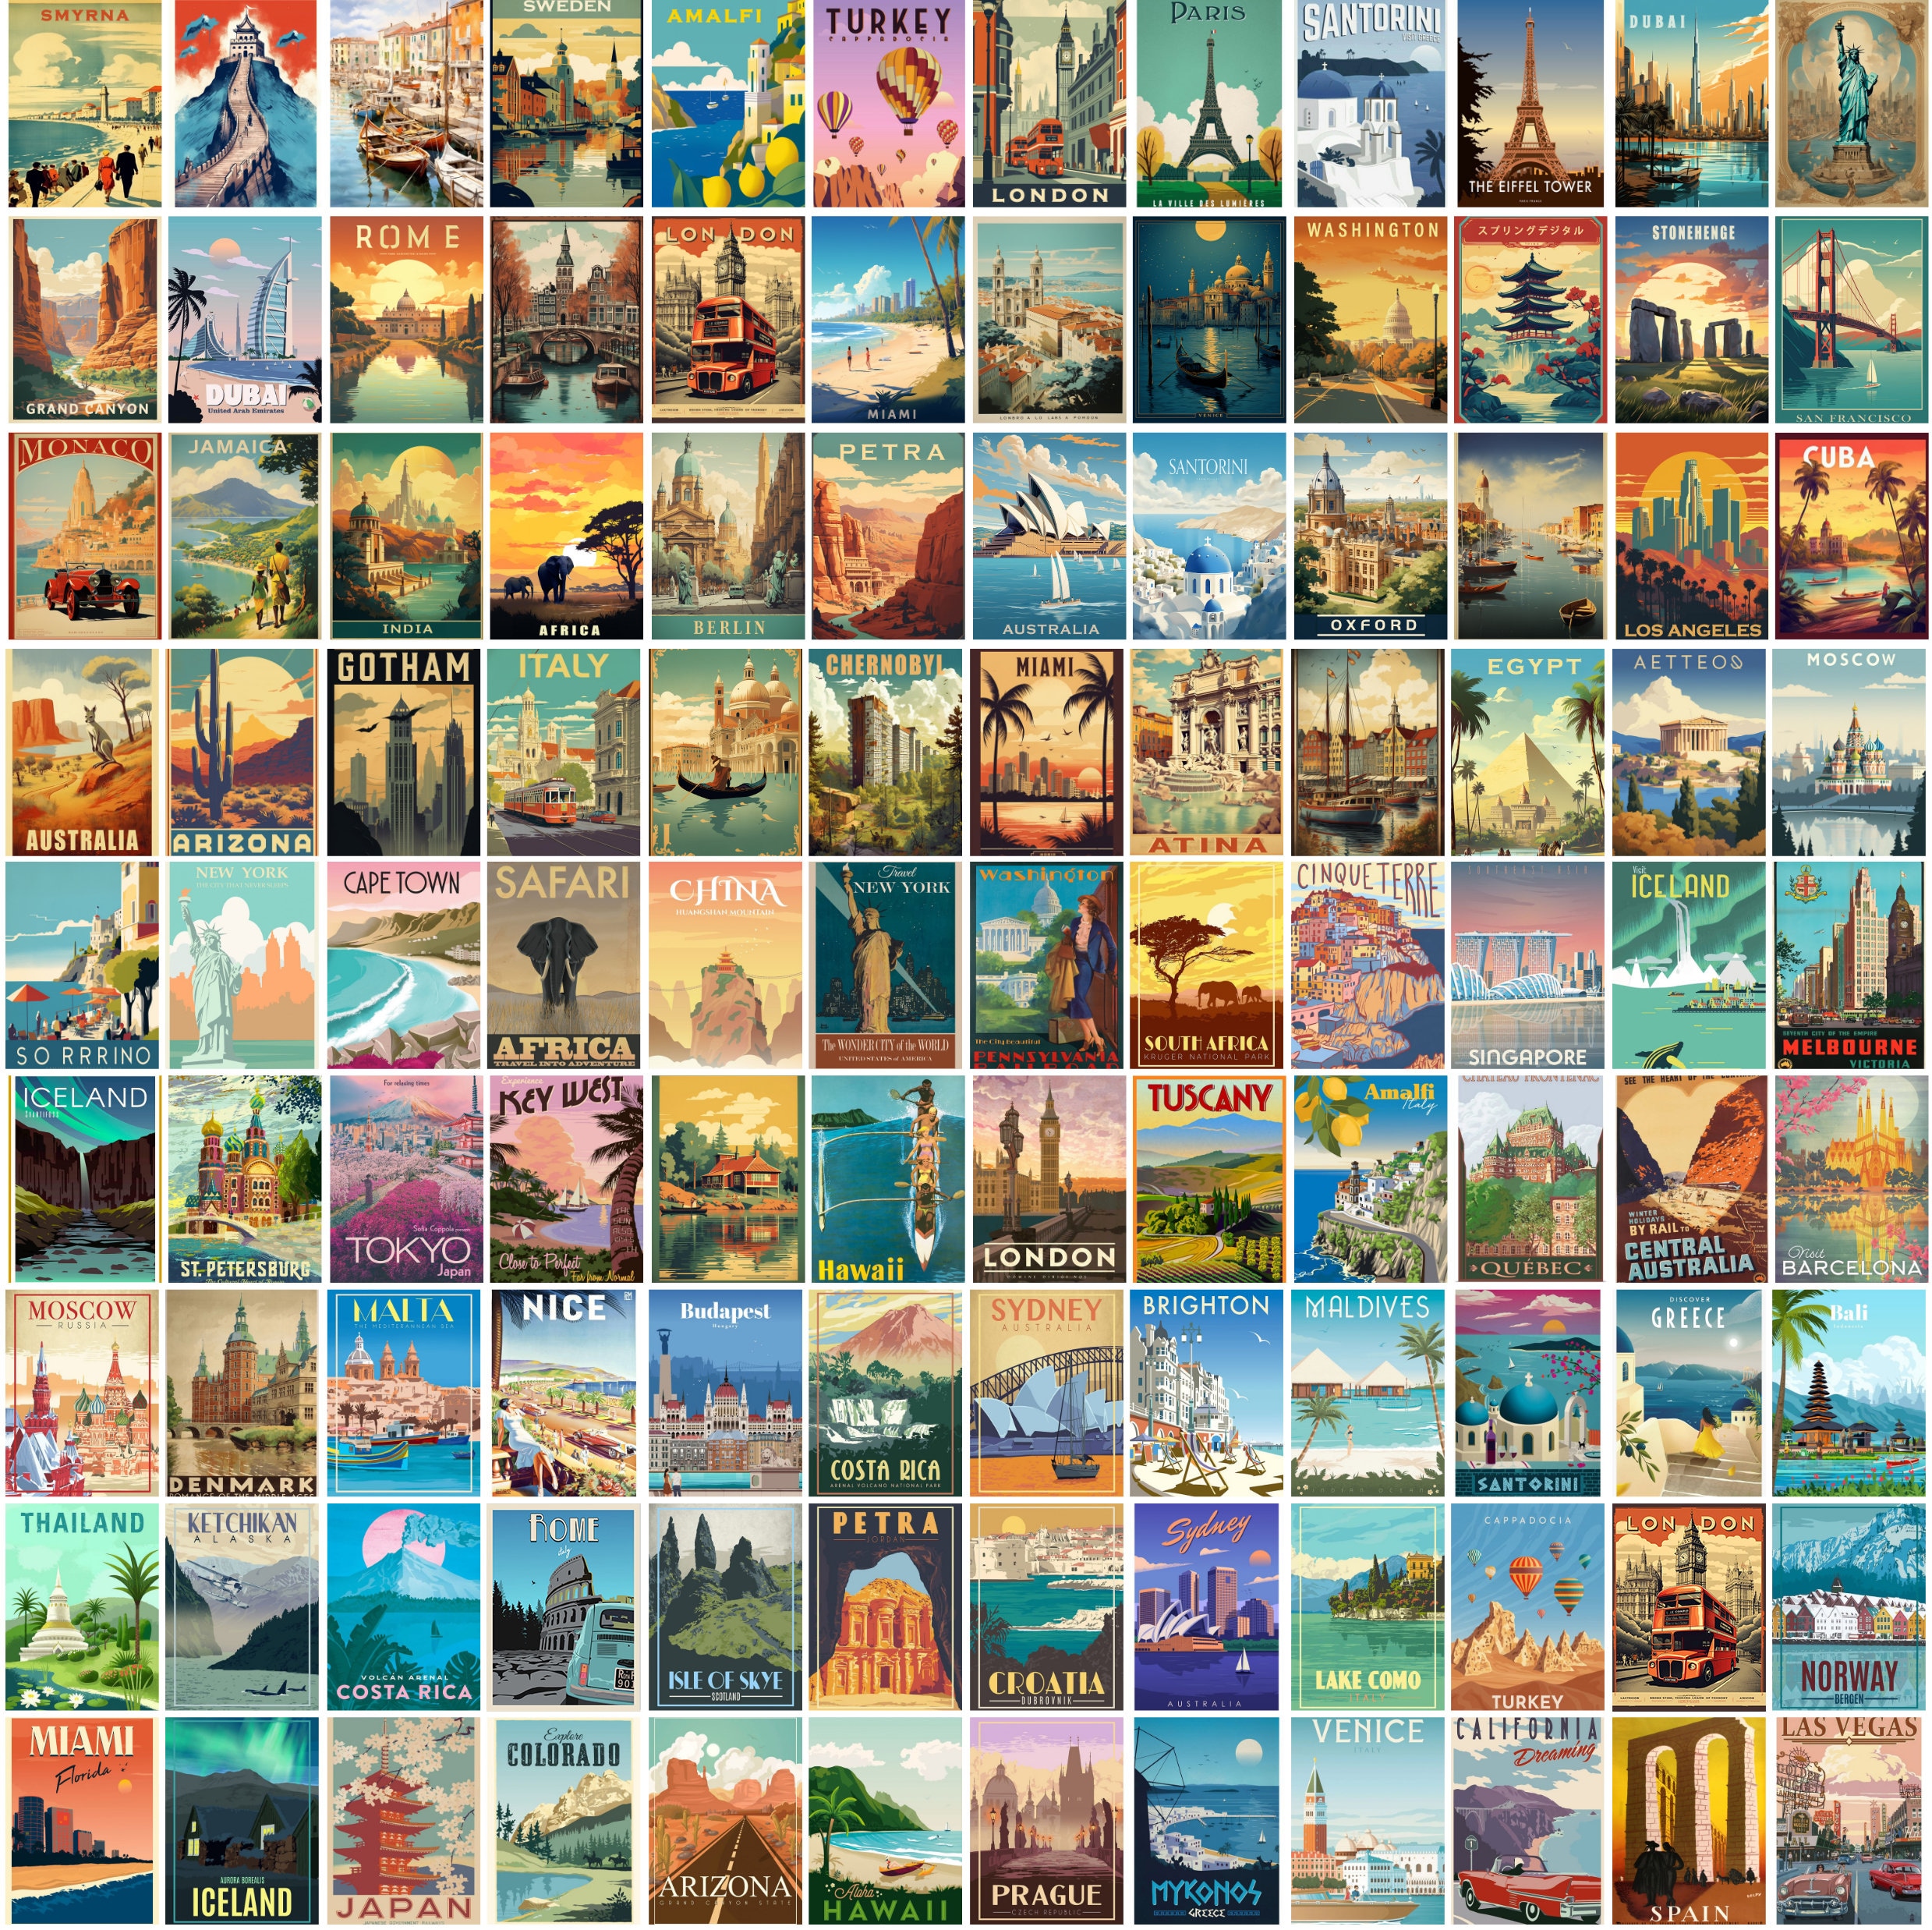 VINTAGE TRAVEL POSTERS by ALECSE™ – My Retro Poster